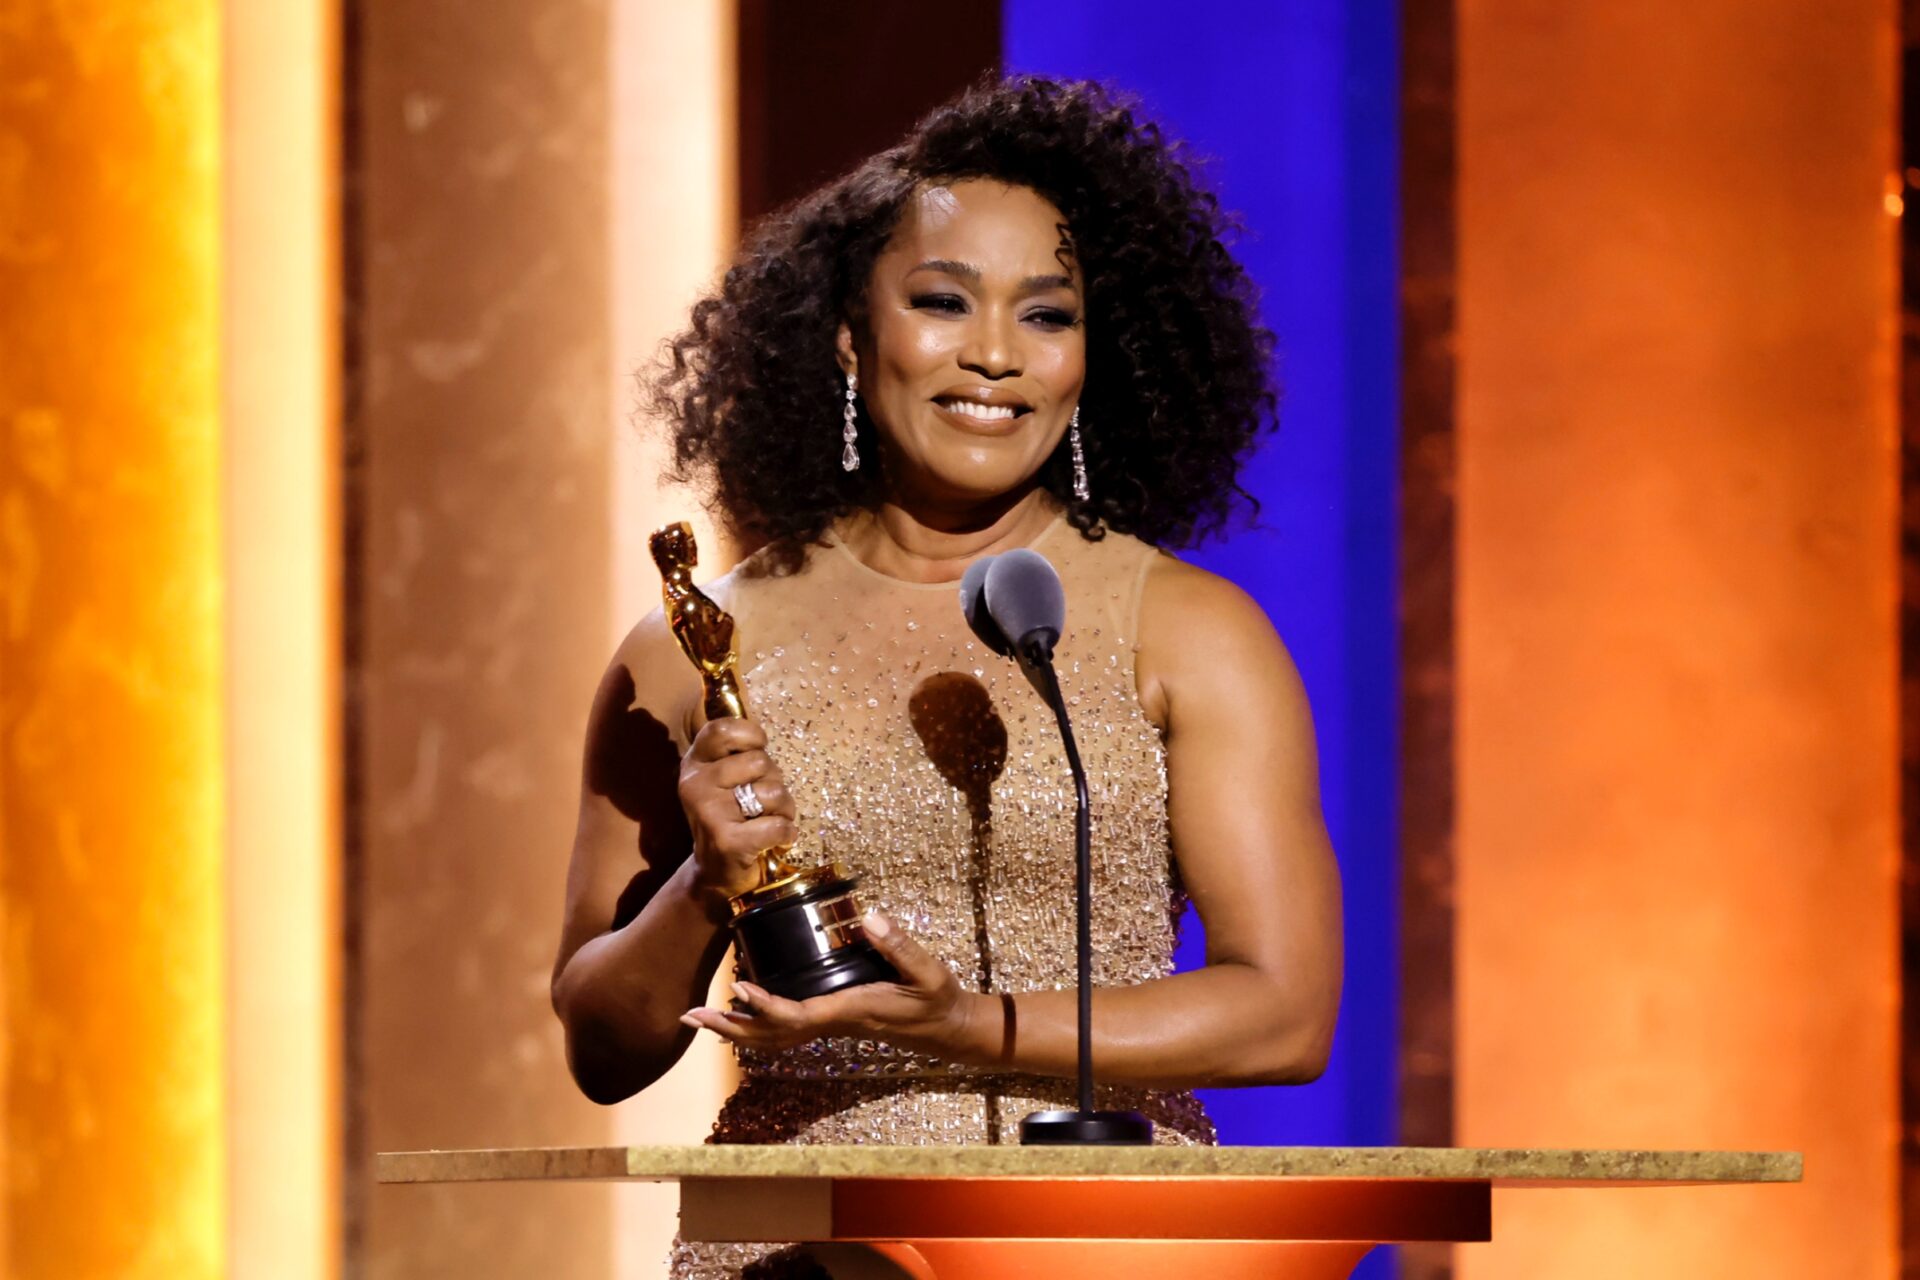 Angela Bassett Delivers Powerful Oscars Speech, ‘There Is Room For Us All’